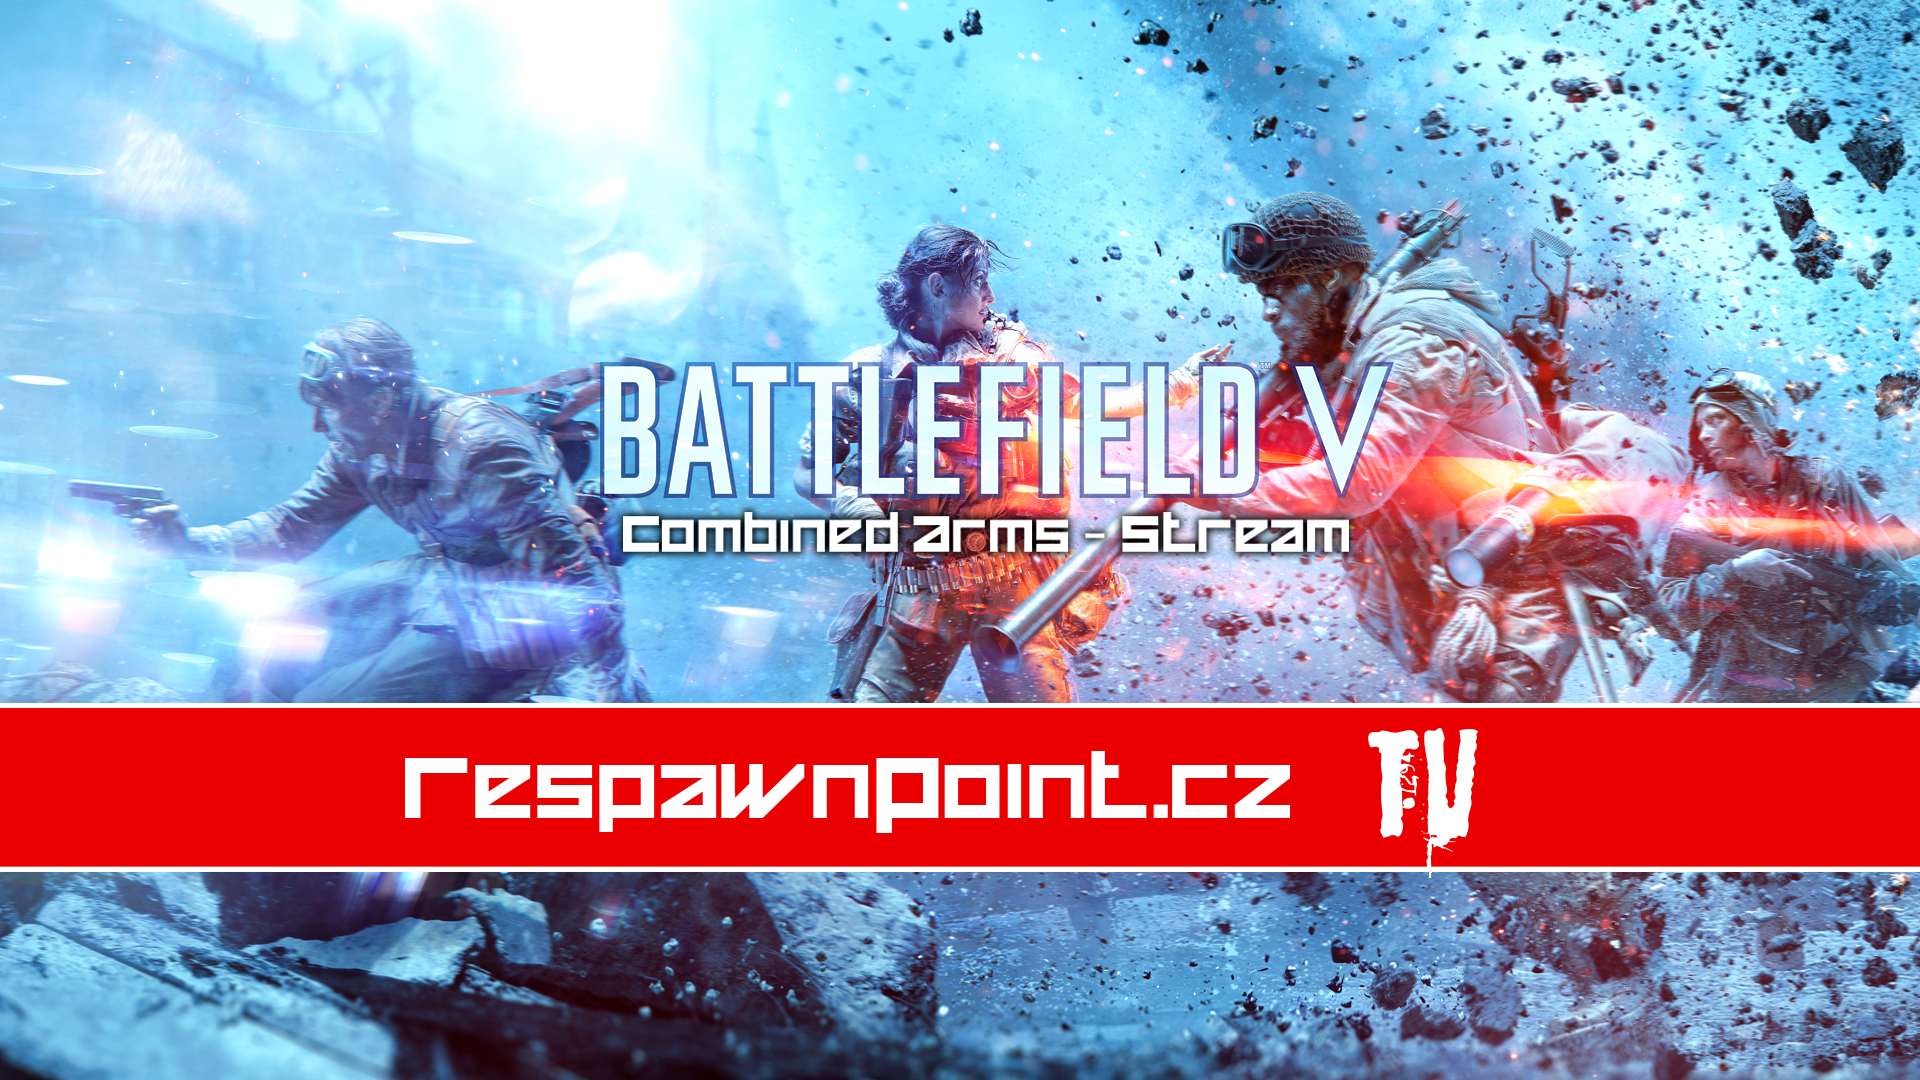 Battlefield V – Combined Arms Stream